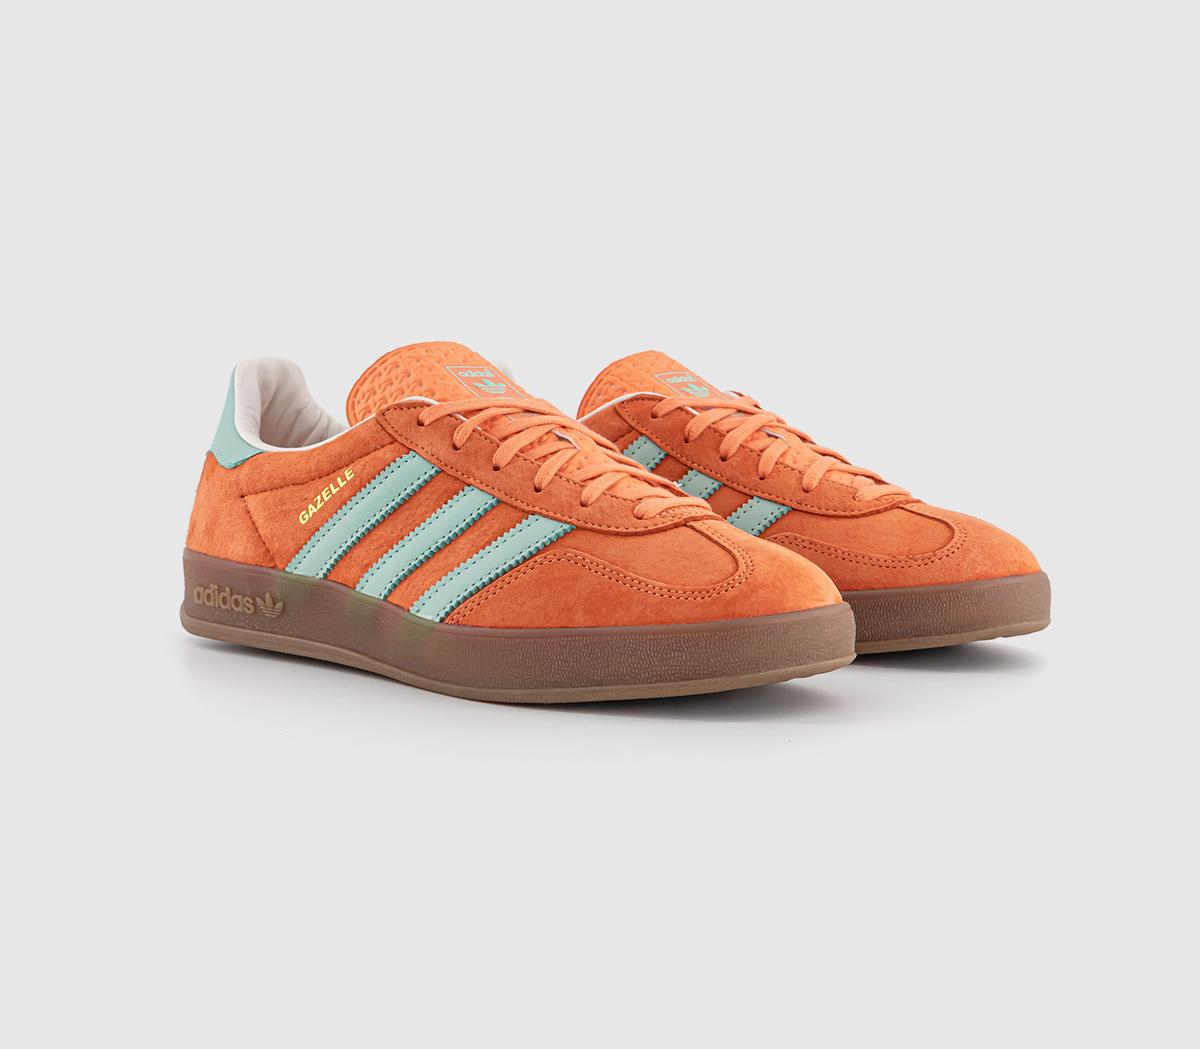 Adidas Gazelle Indoor Trainers Easy Orange Clear Mint Gum Red, 5